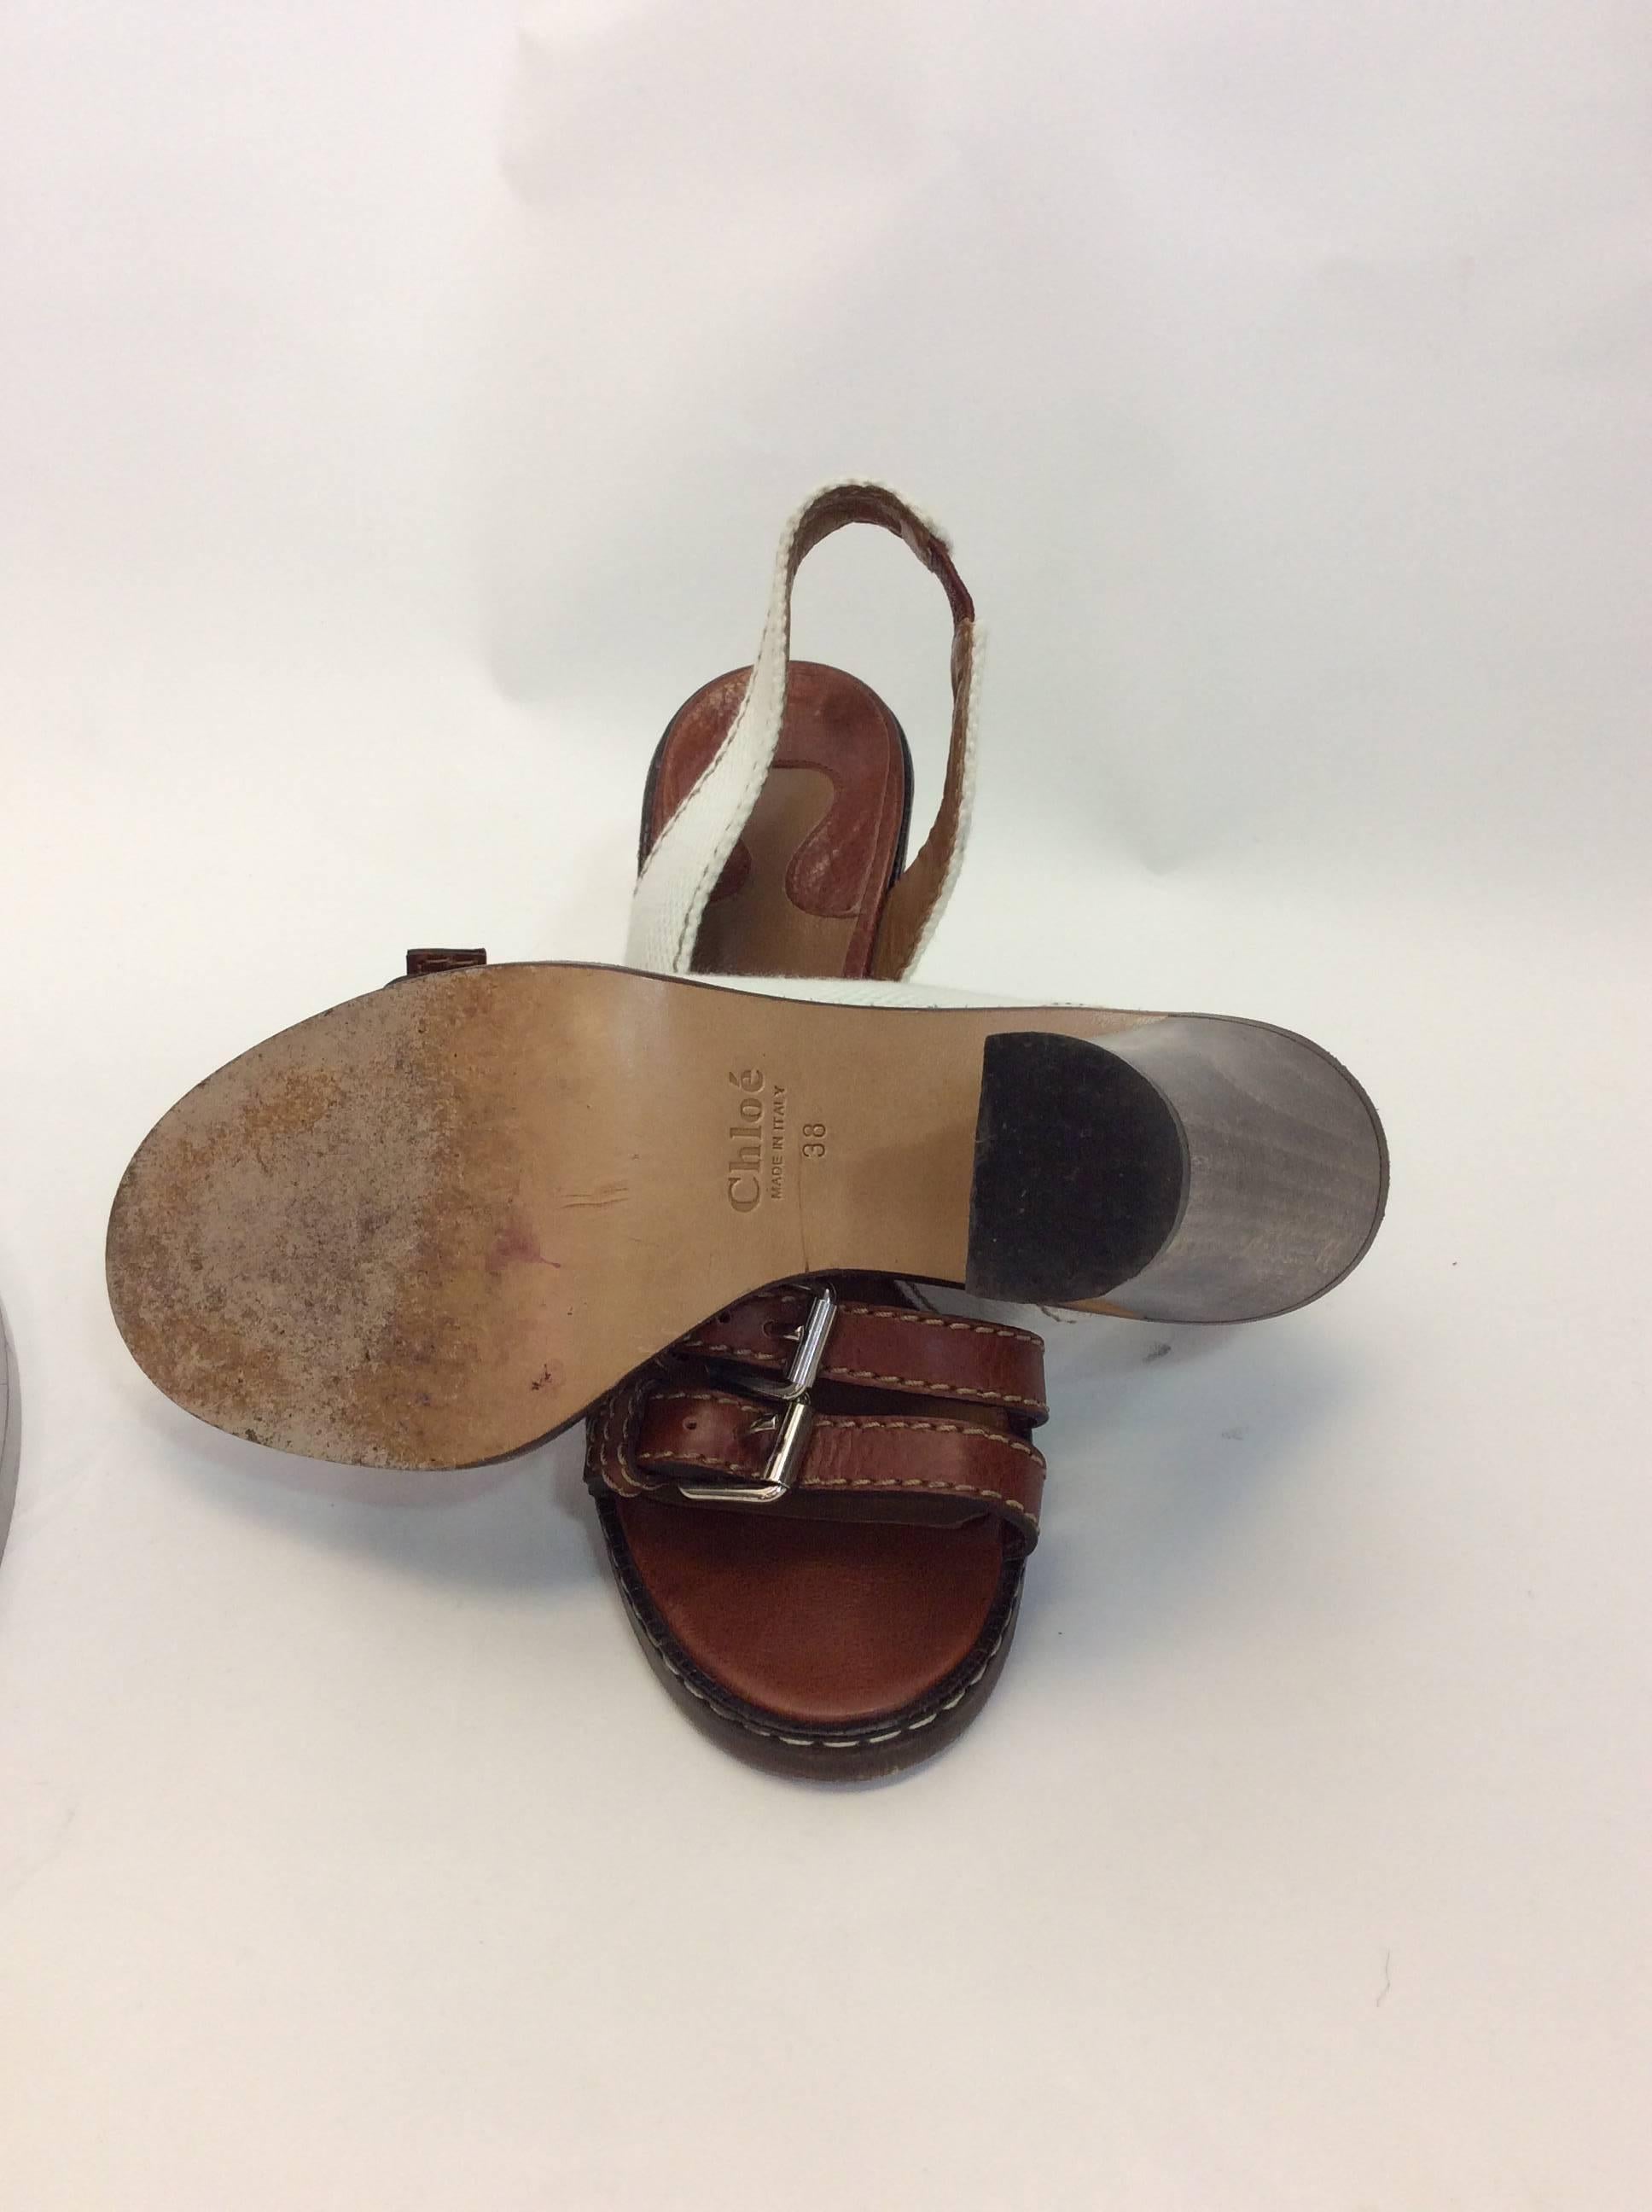 Chloe Leather Buckle Canvas Heels In Excellent Condition For Sale In Narberth, PA